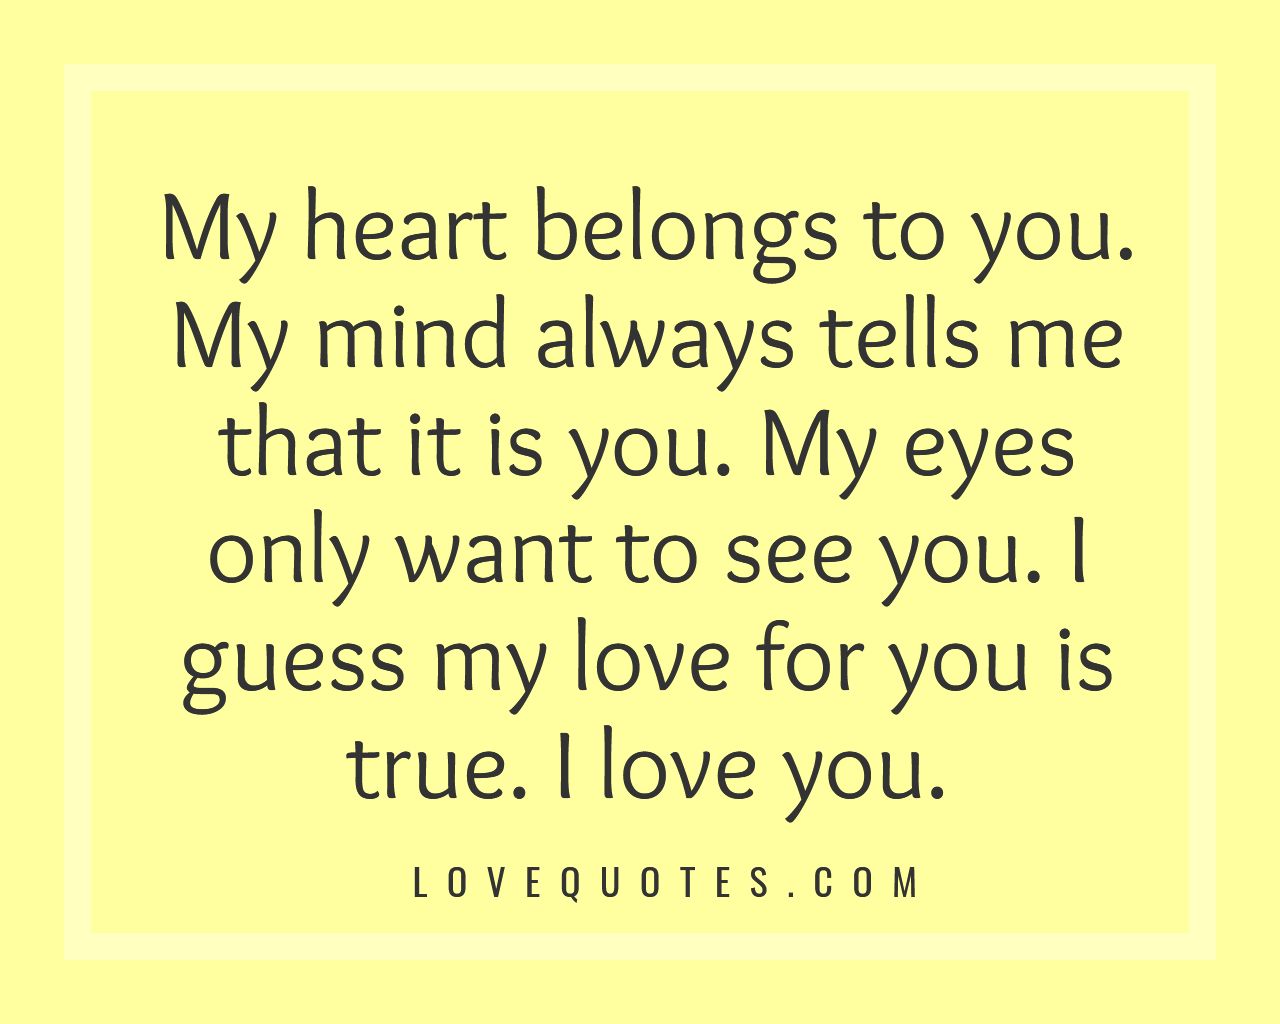 My Heart Belongs To You - Love Quotes